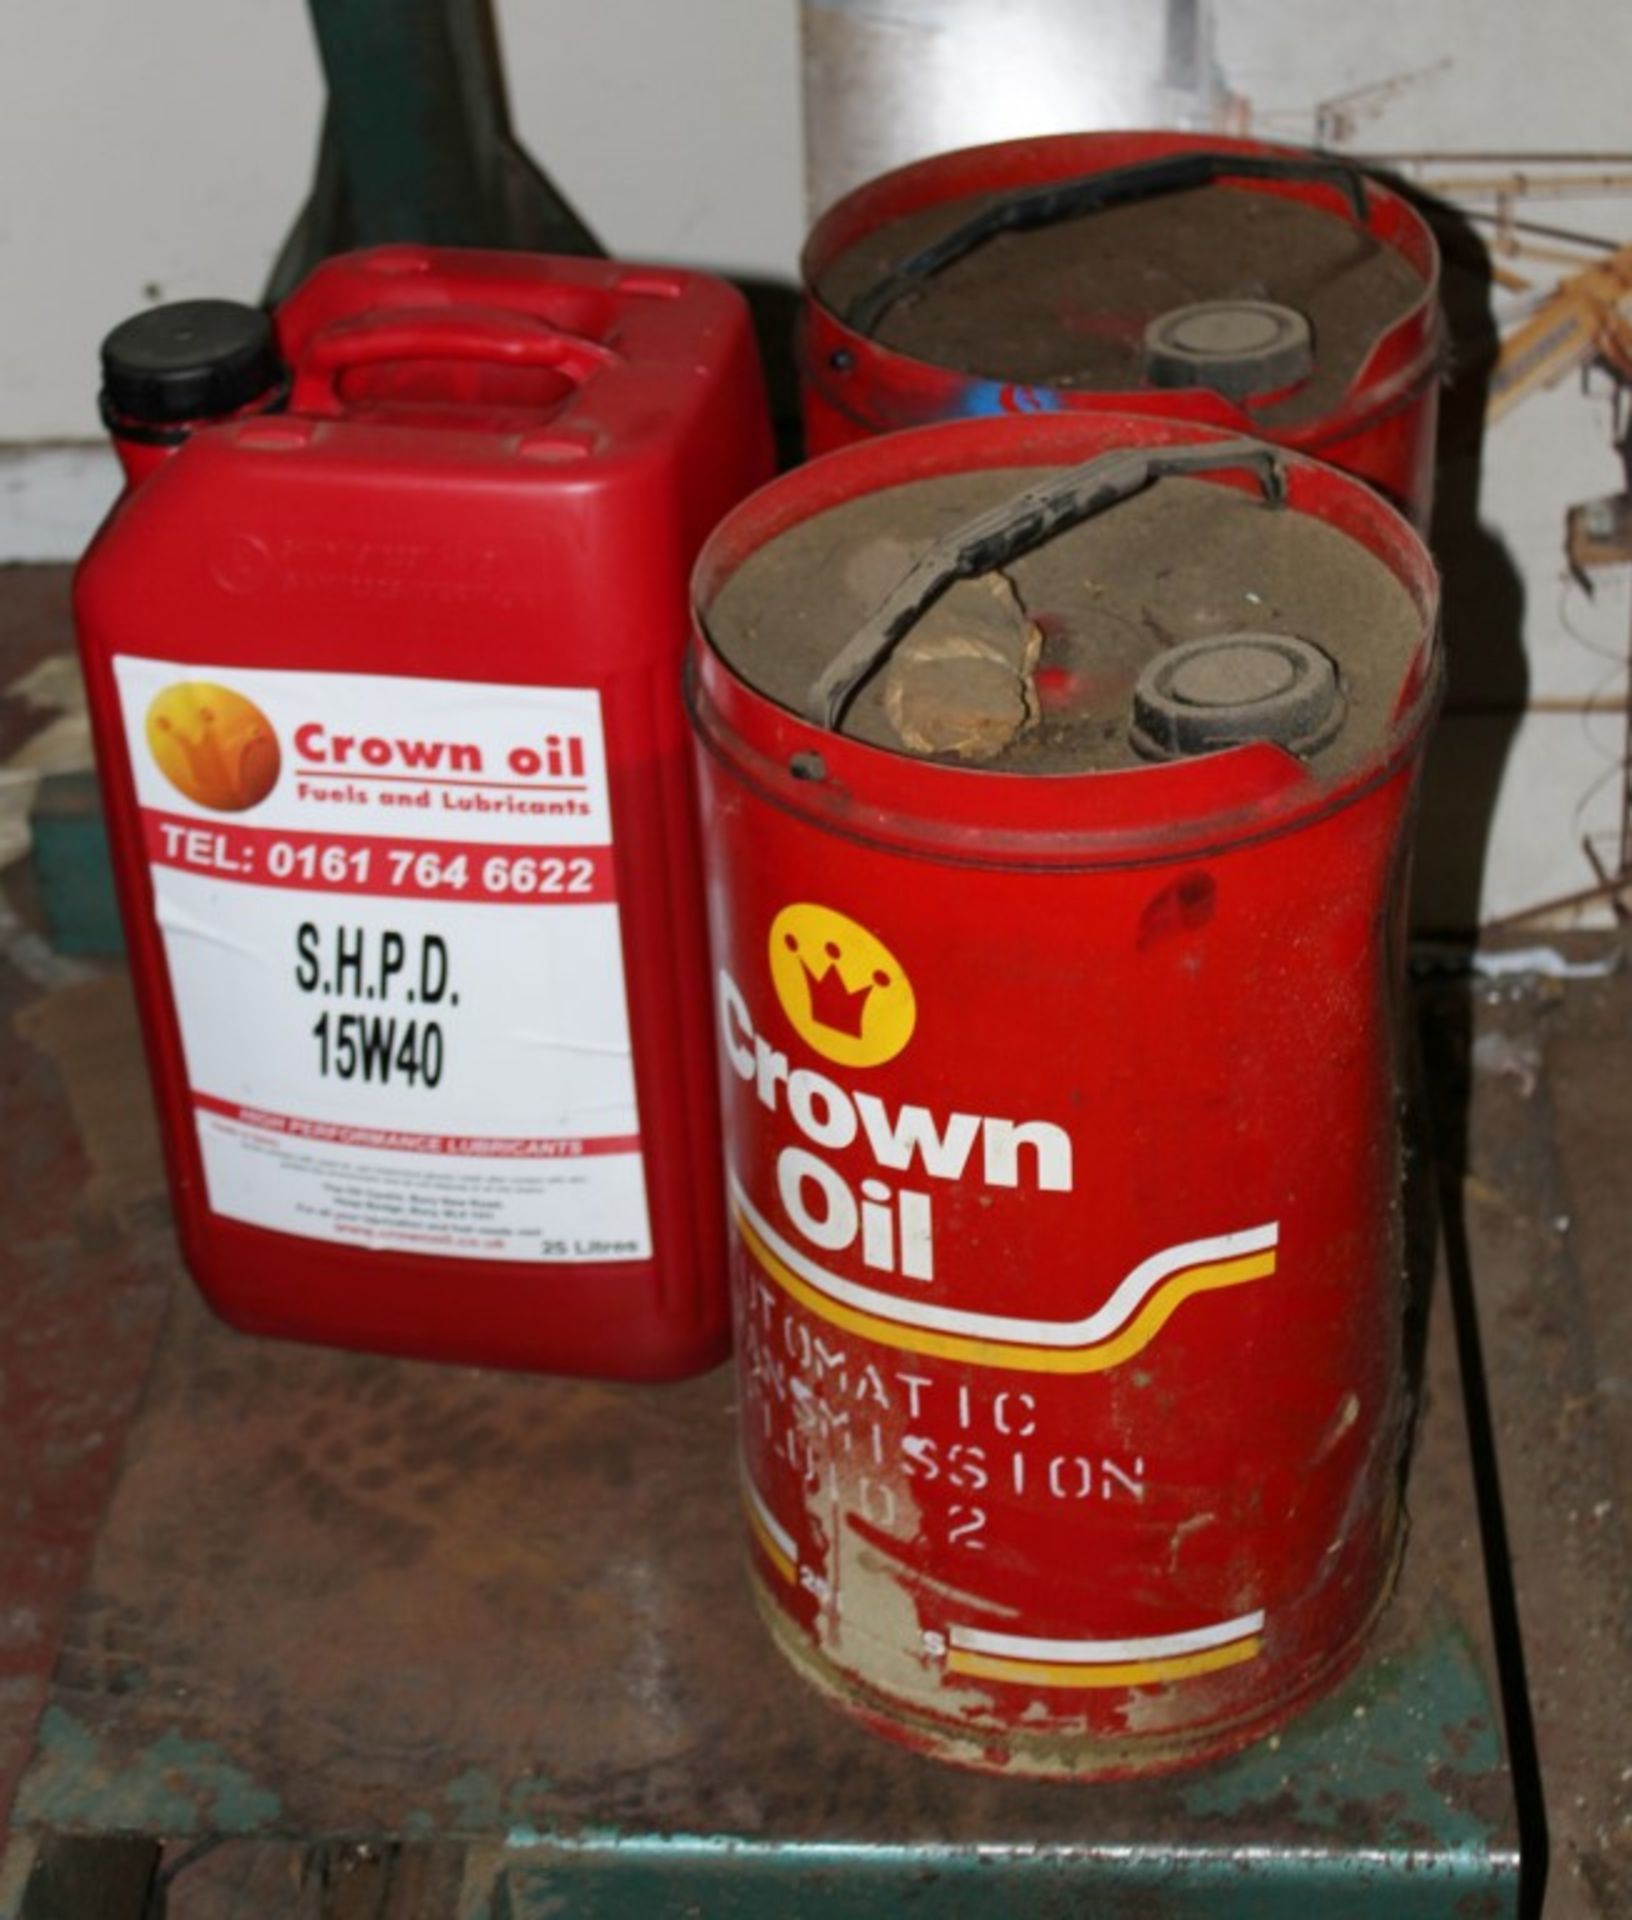 3 x 25 Litre Containers of Crown Oil - 2 Full and 1 Part Full - CL151 - Ref R010 - Location: